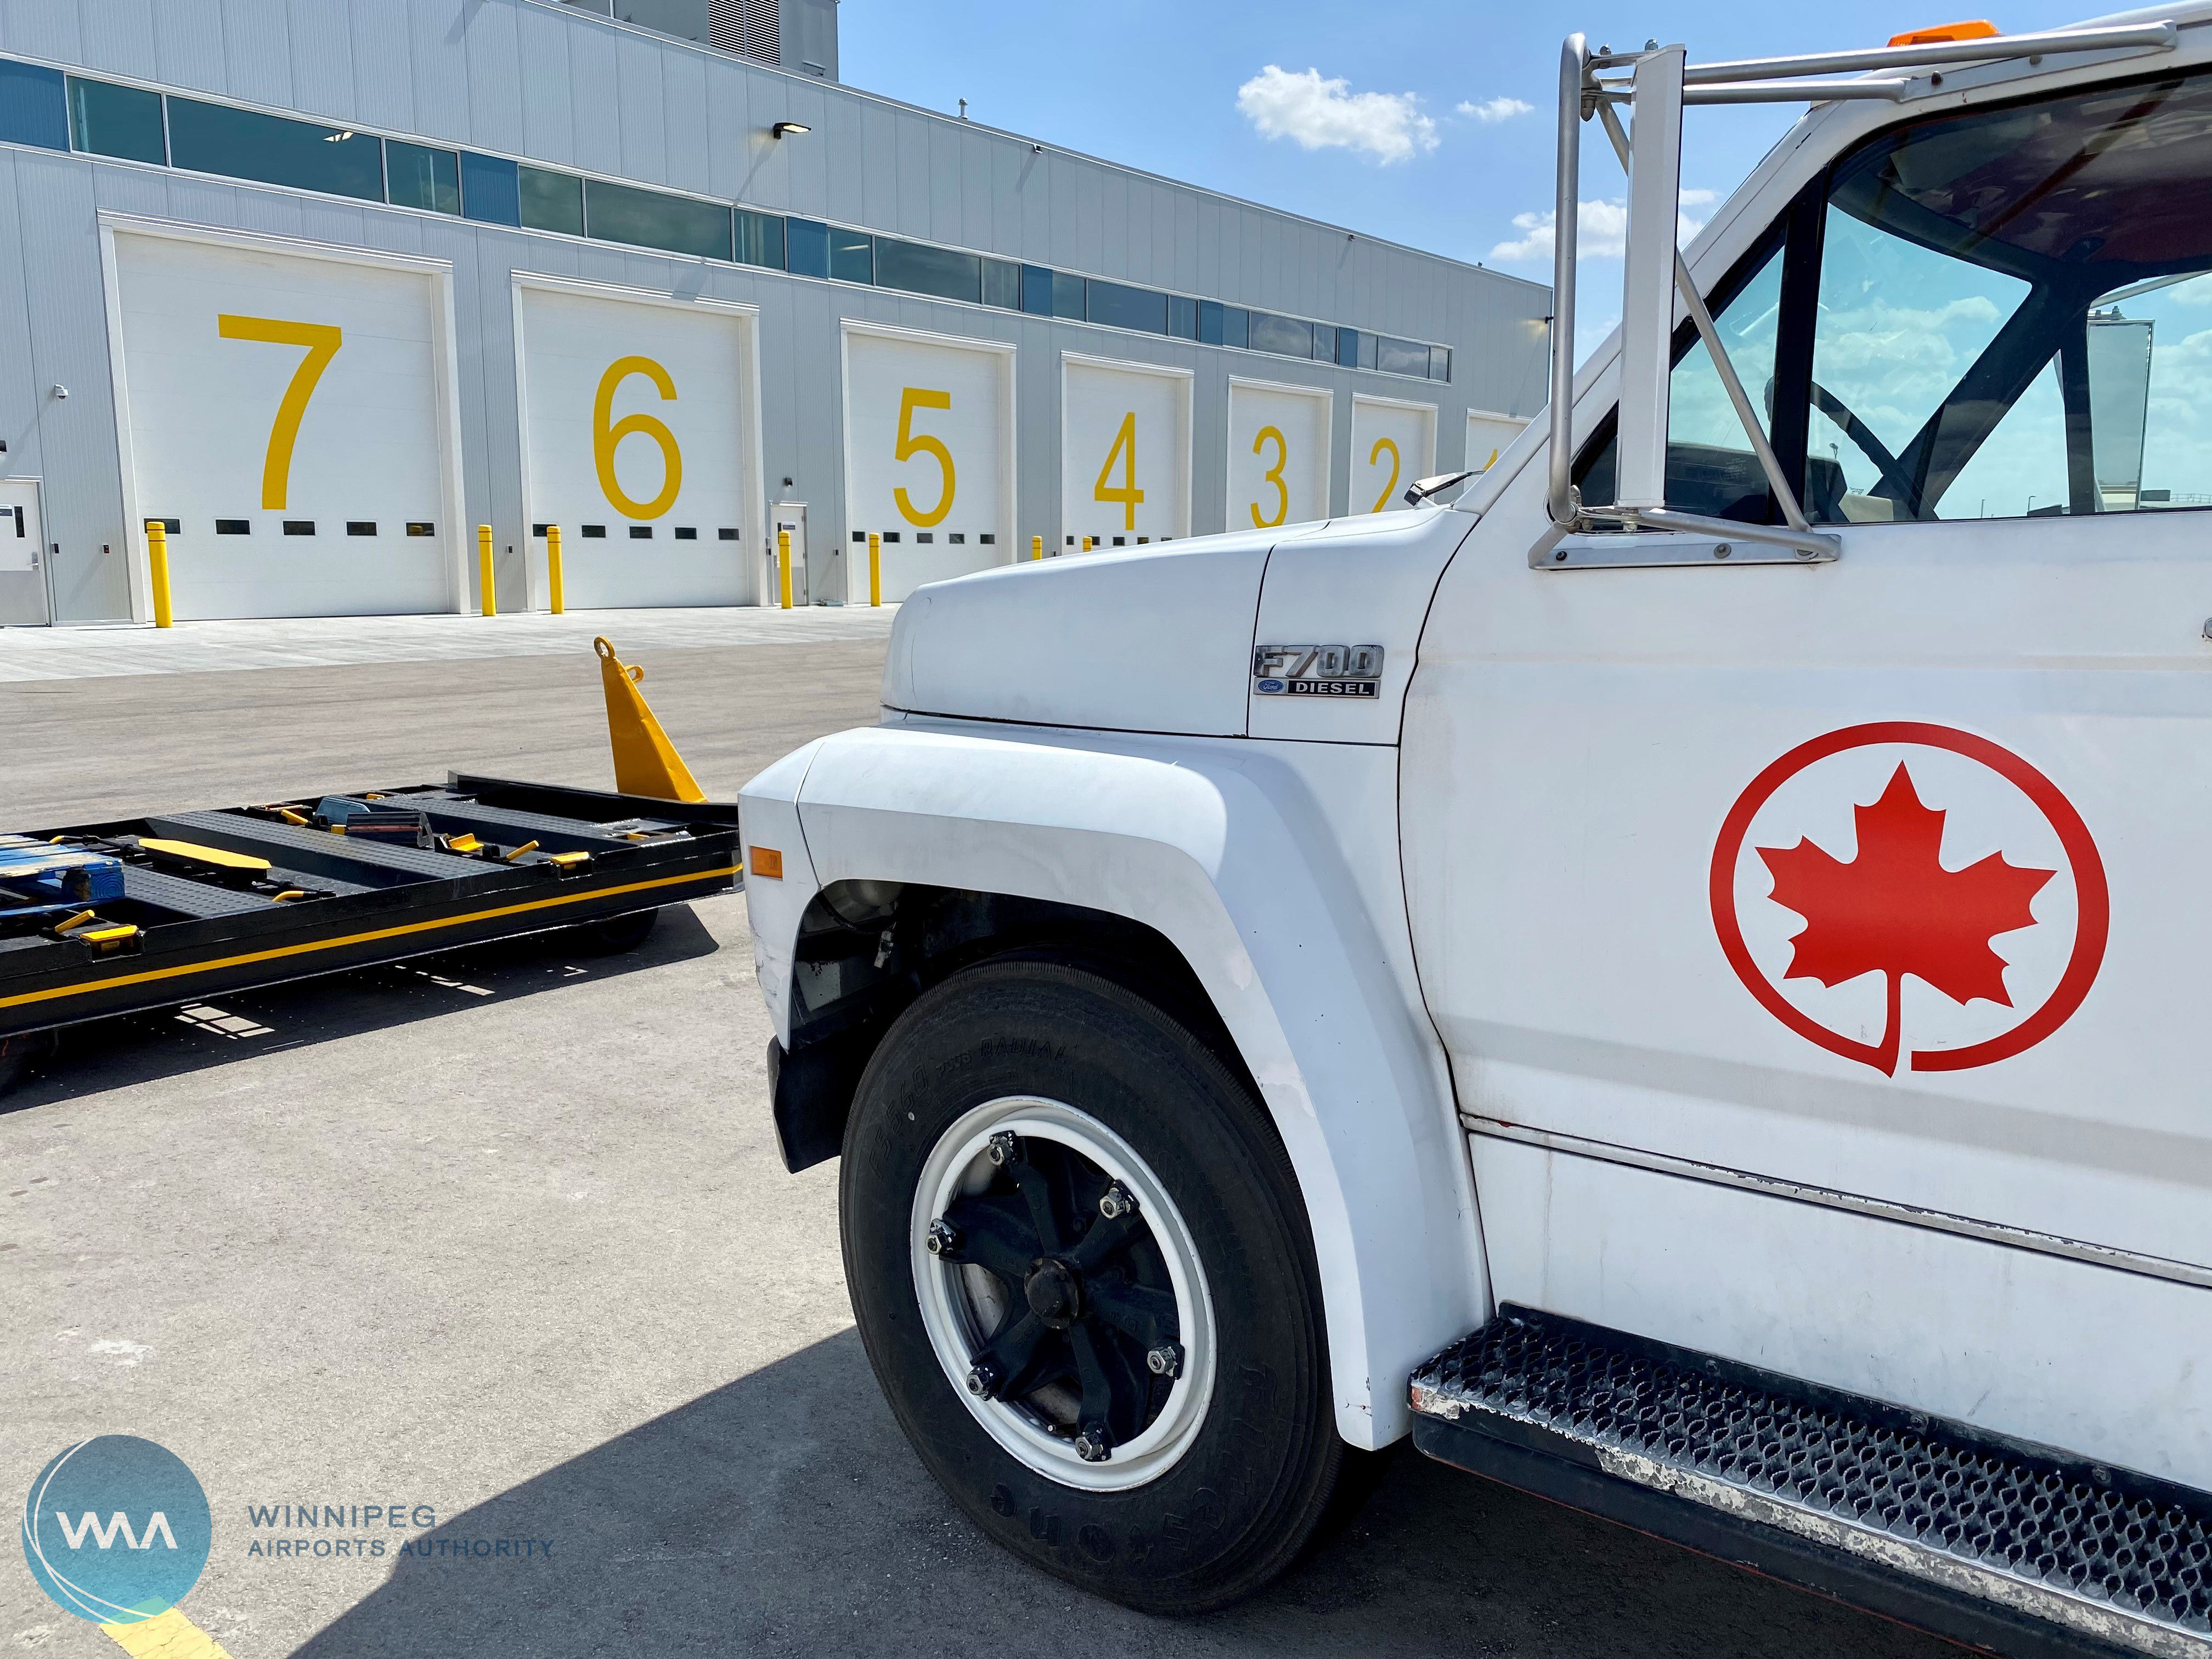 Air Canada vehicle parked outside